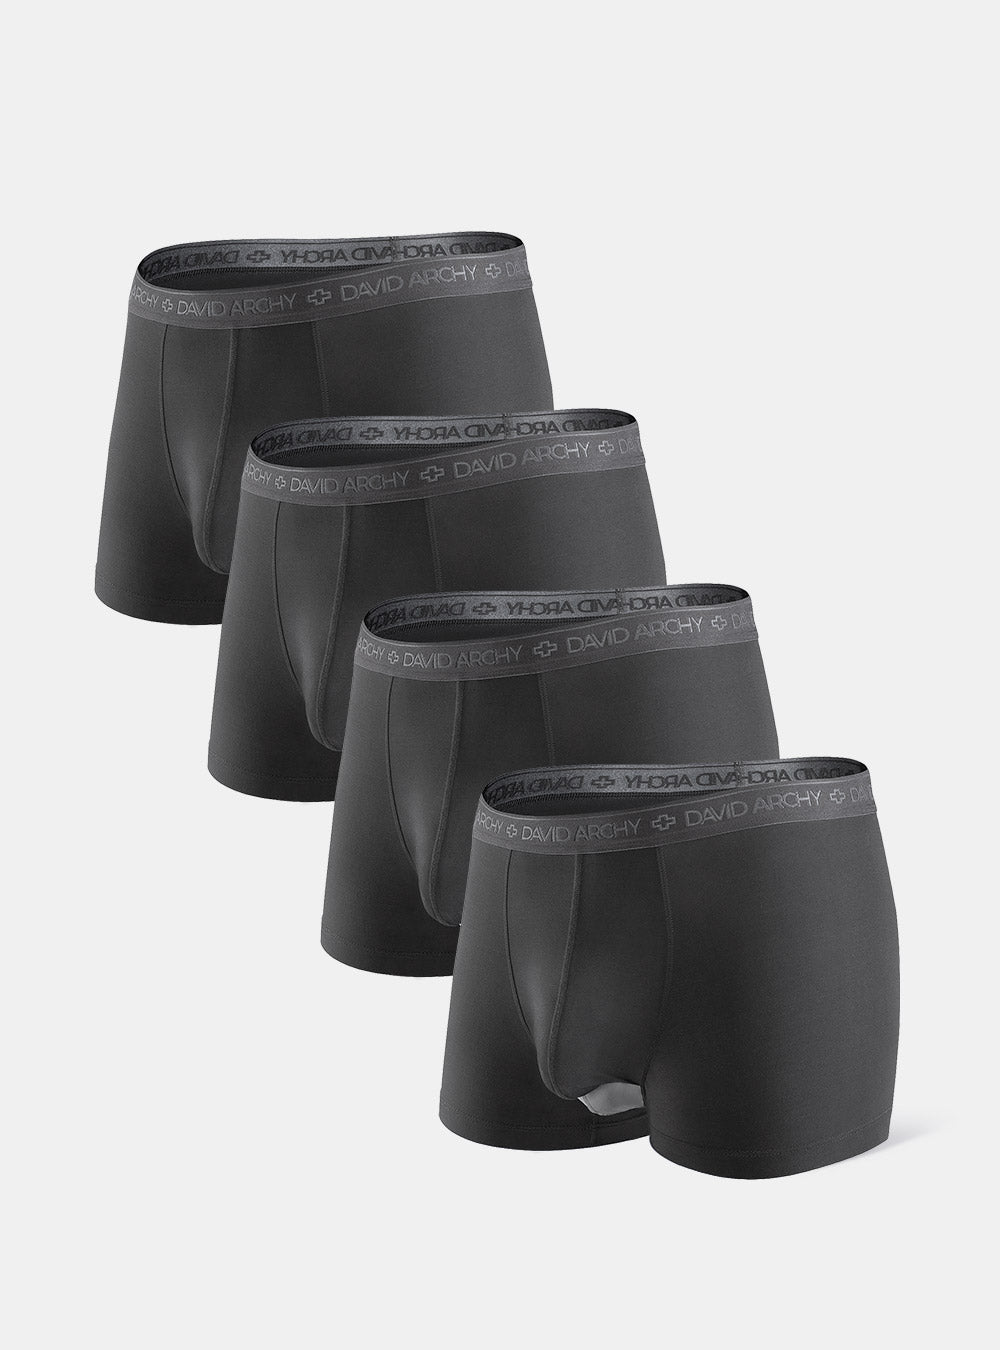 ALMO - Mens Trunks | Micro Modal Underwear for Men | Sweat Absorbent,  Anti-Microbial | Light Weight Inner wear | Solid Collections| Dark  Grey,Navy 